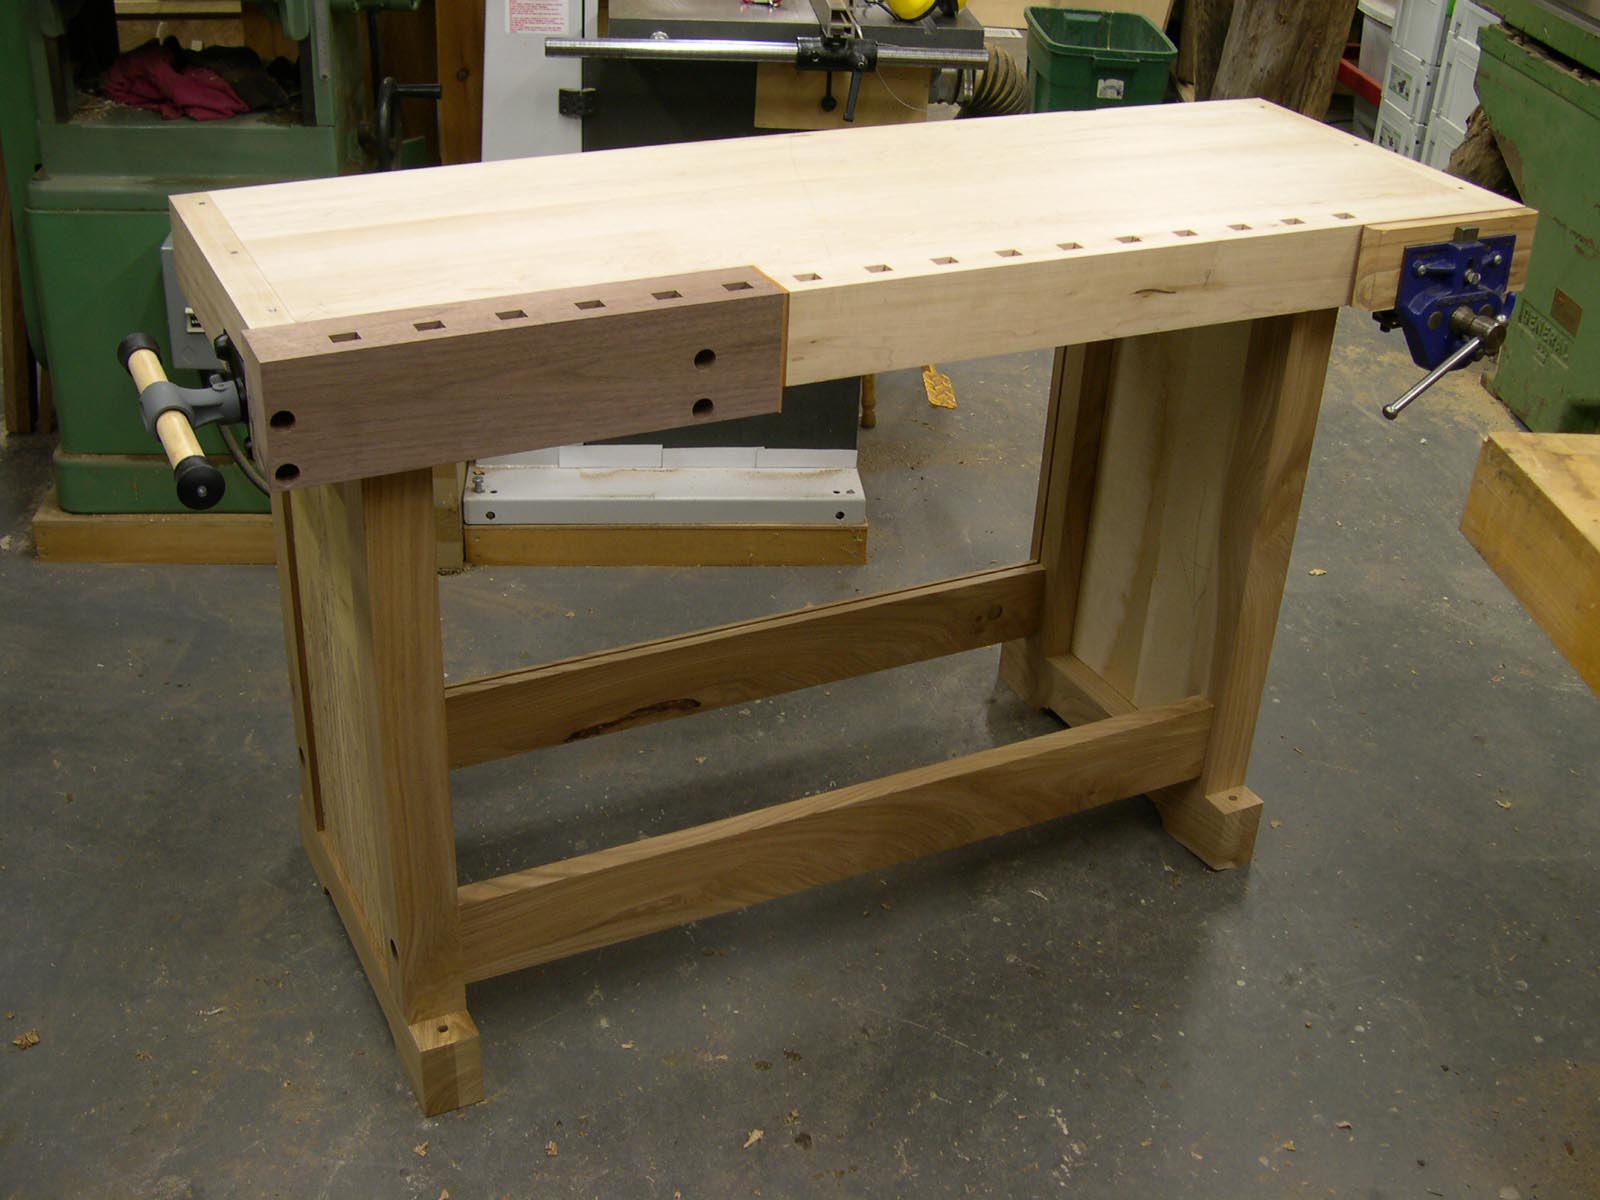 Sauer Steiner: A new bench for Woodworking in America